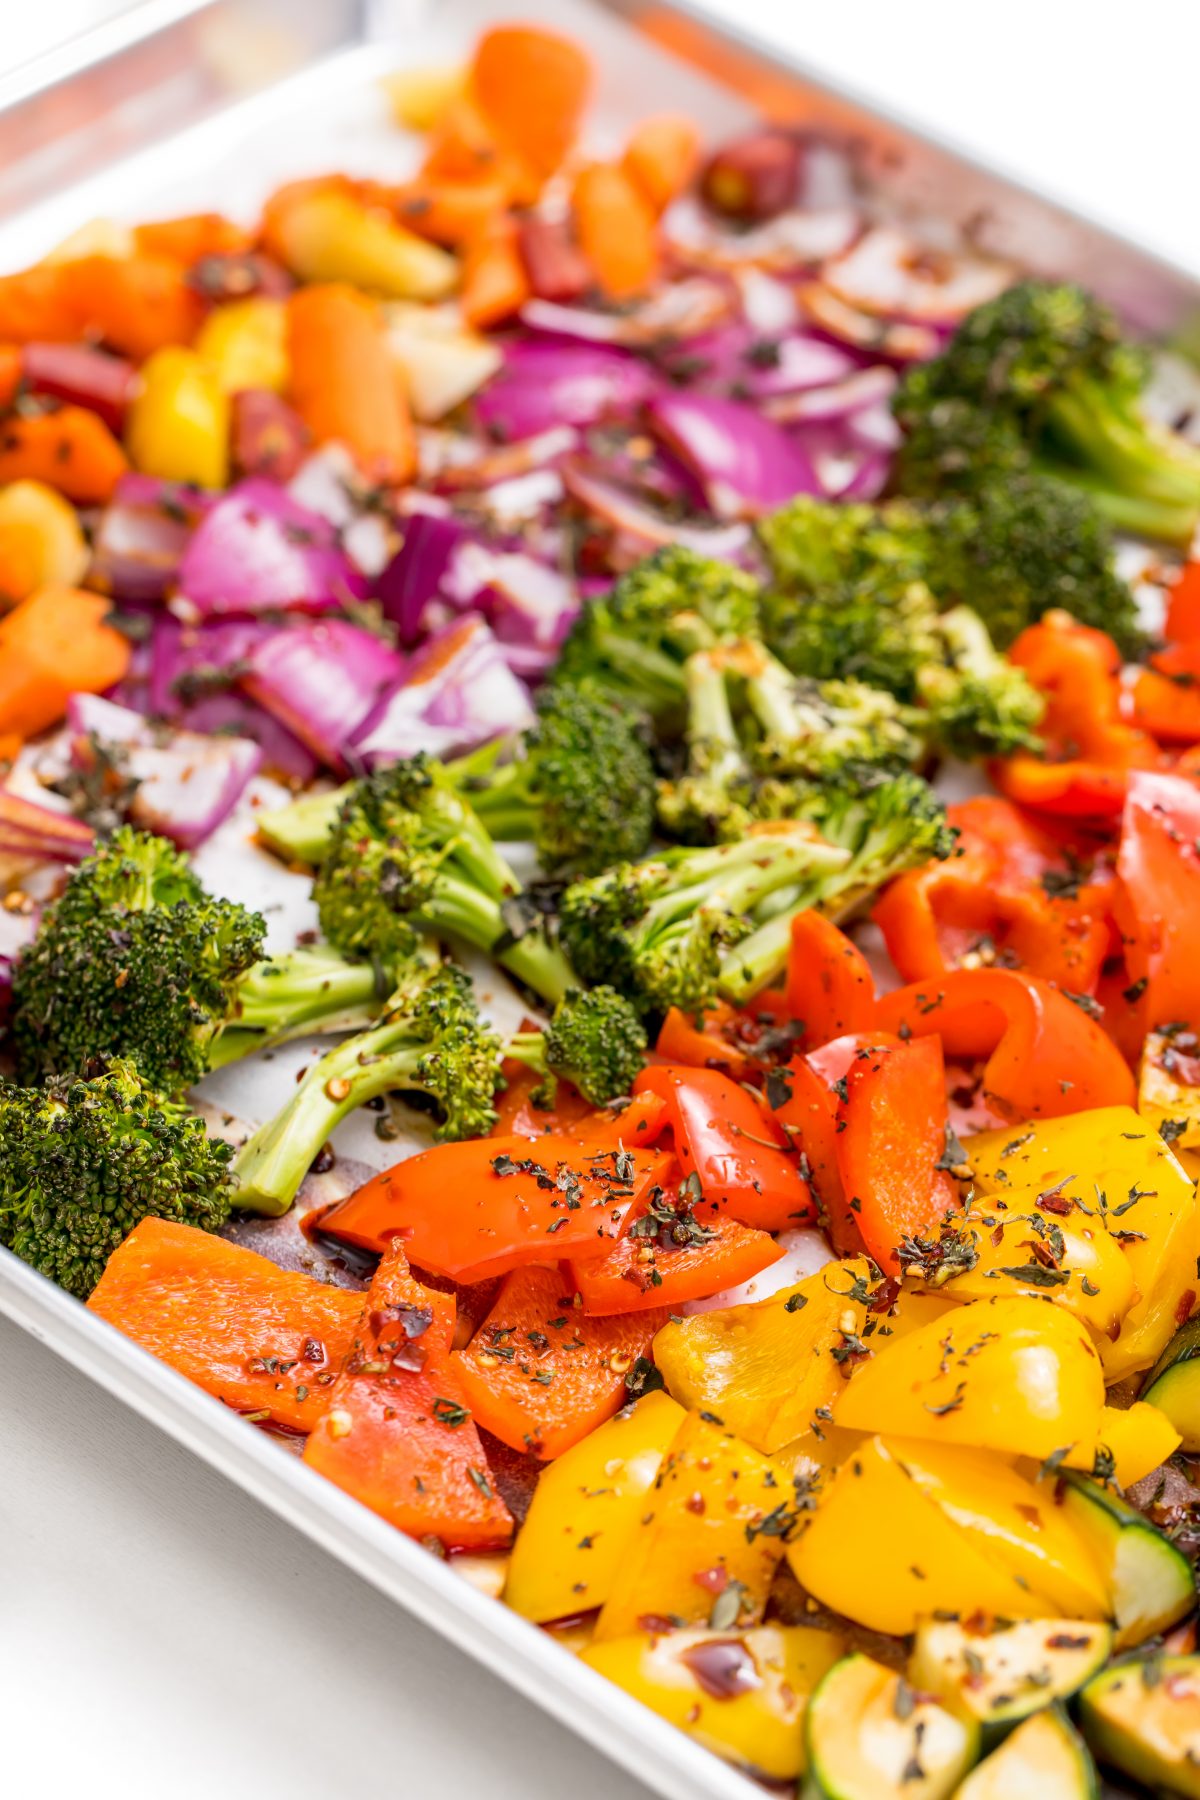 These Rainbow roasted vegetables are so simple to make!